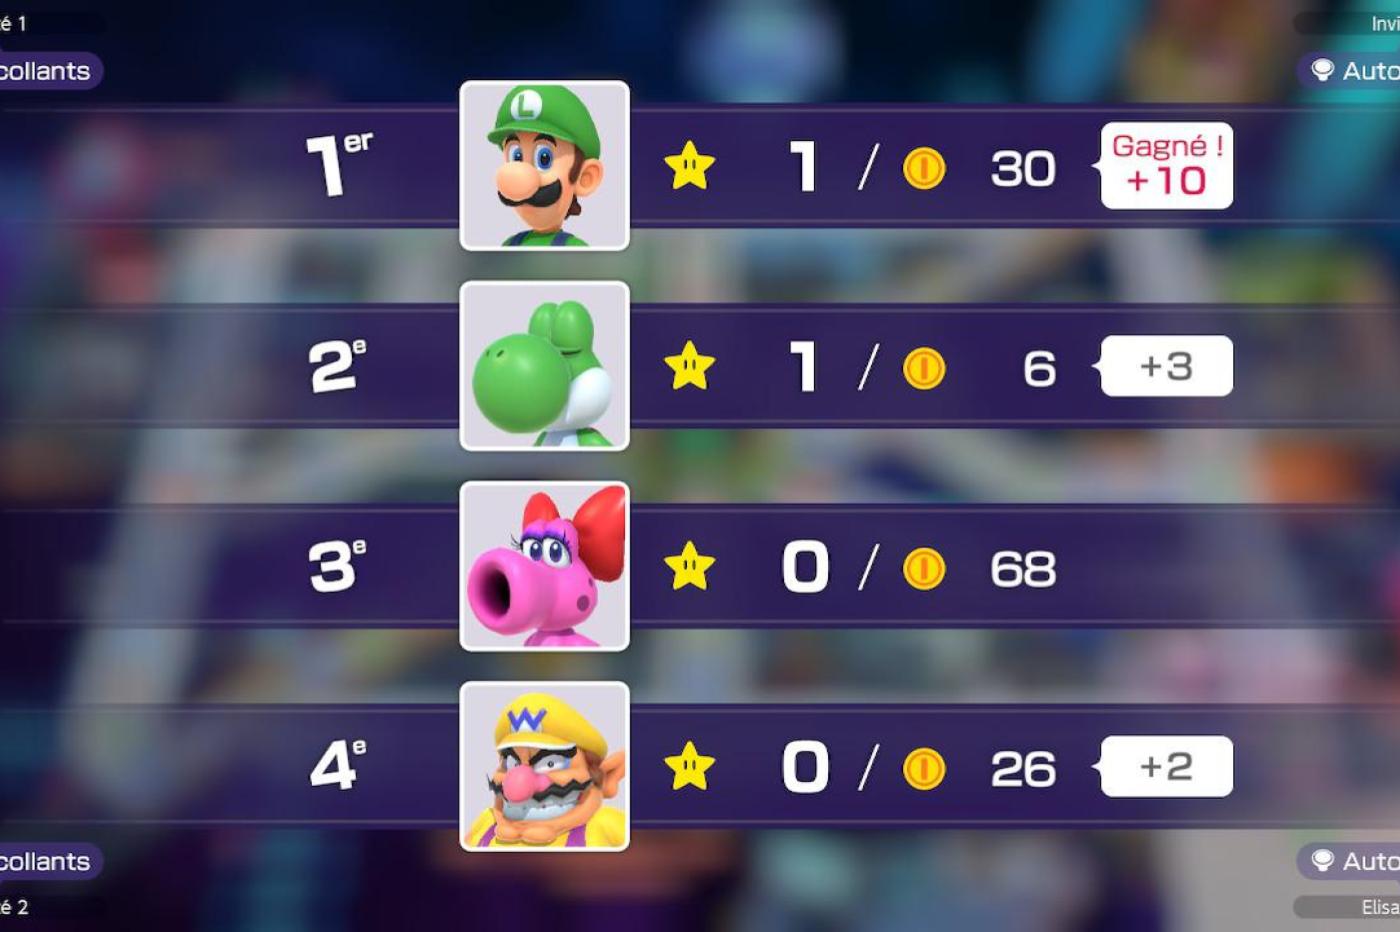 Test mario party superstars plateaux